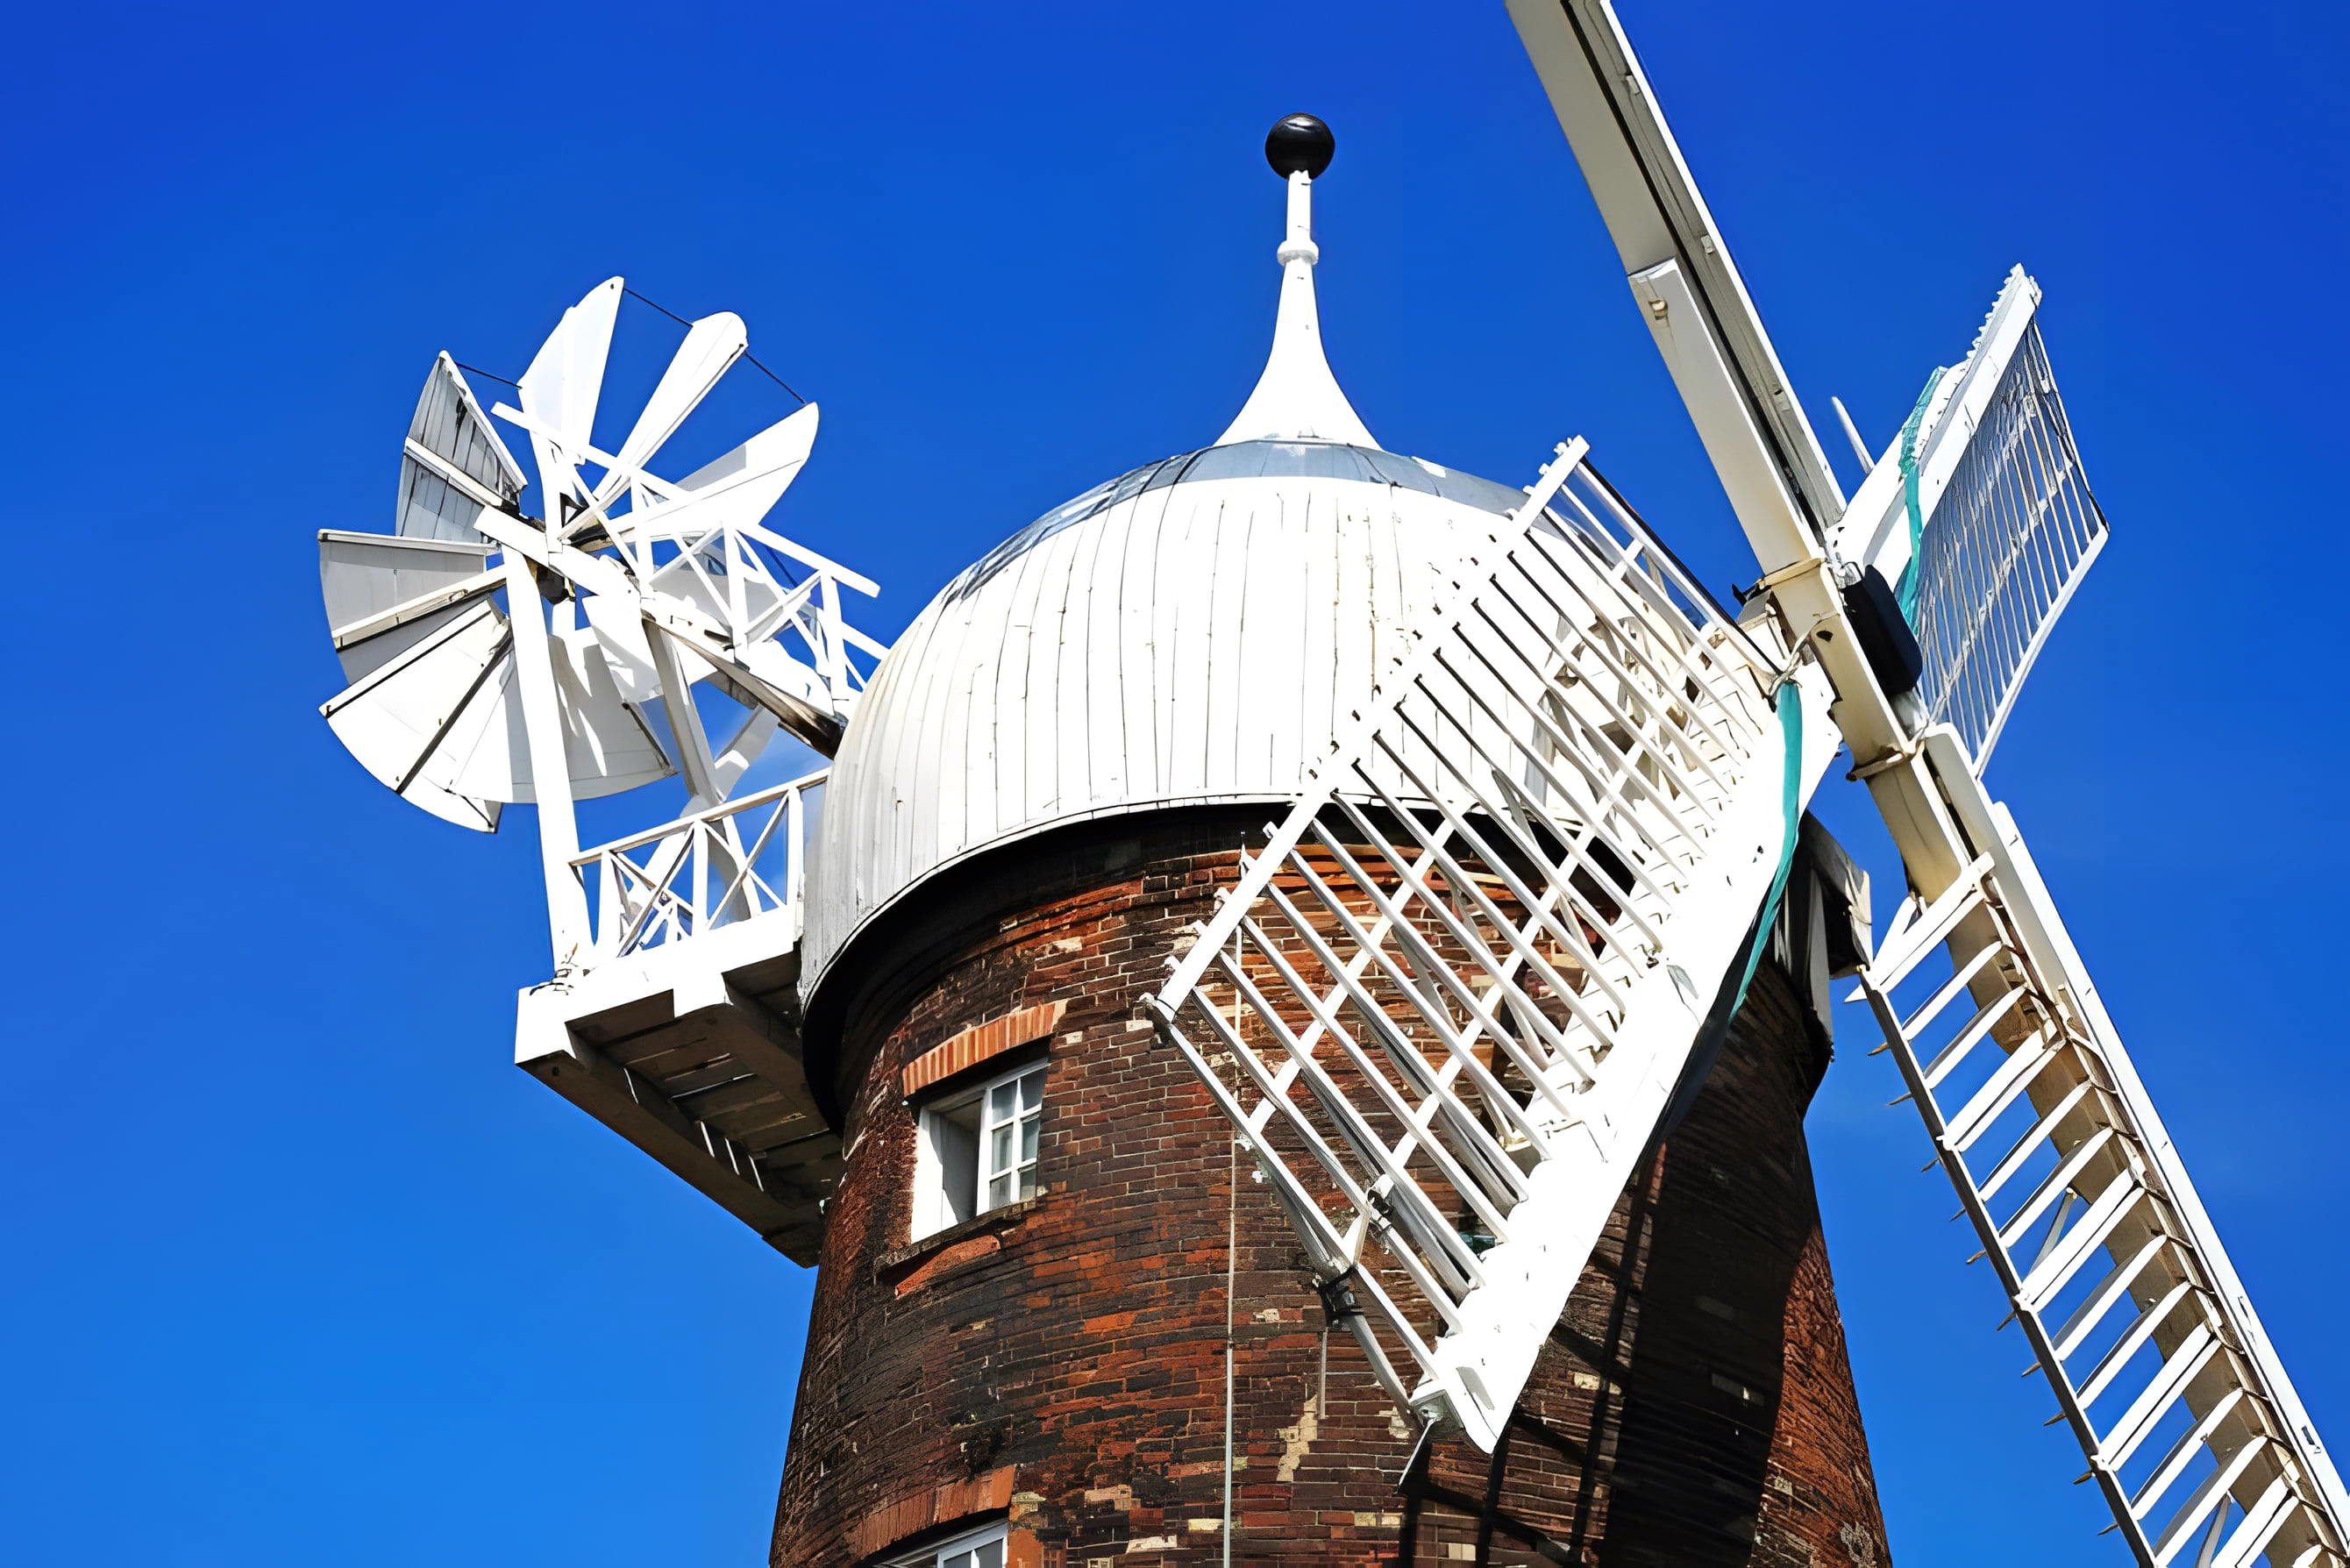 Green's Windmill and Science Centre